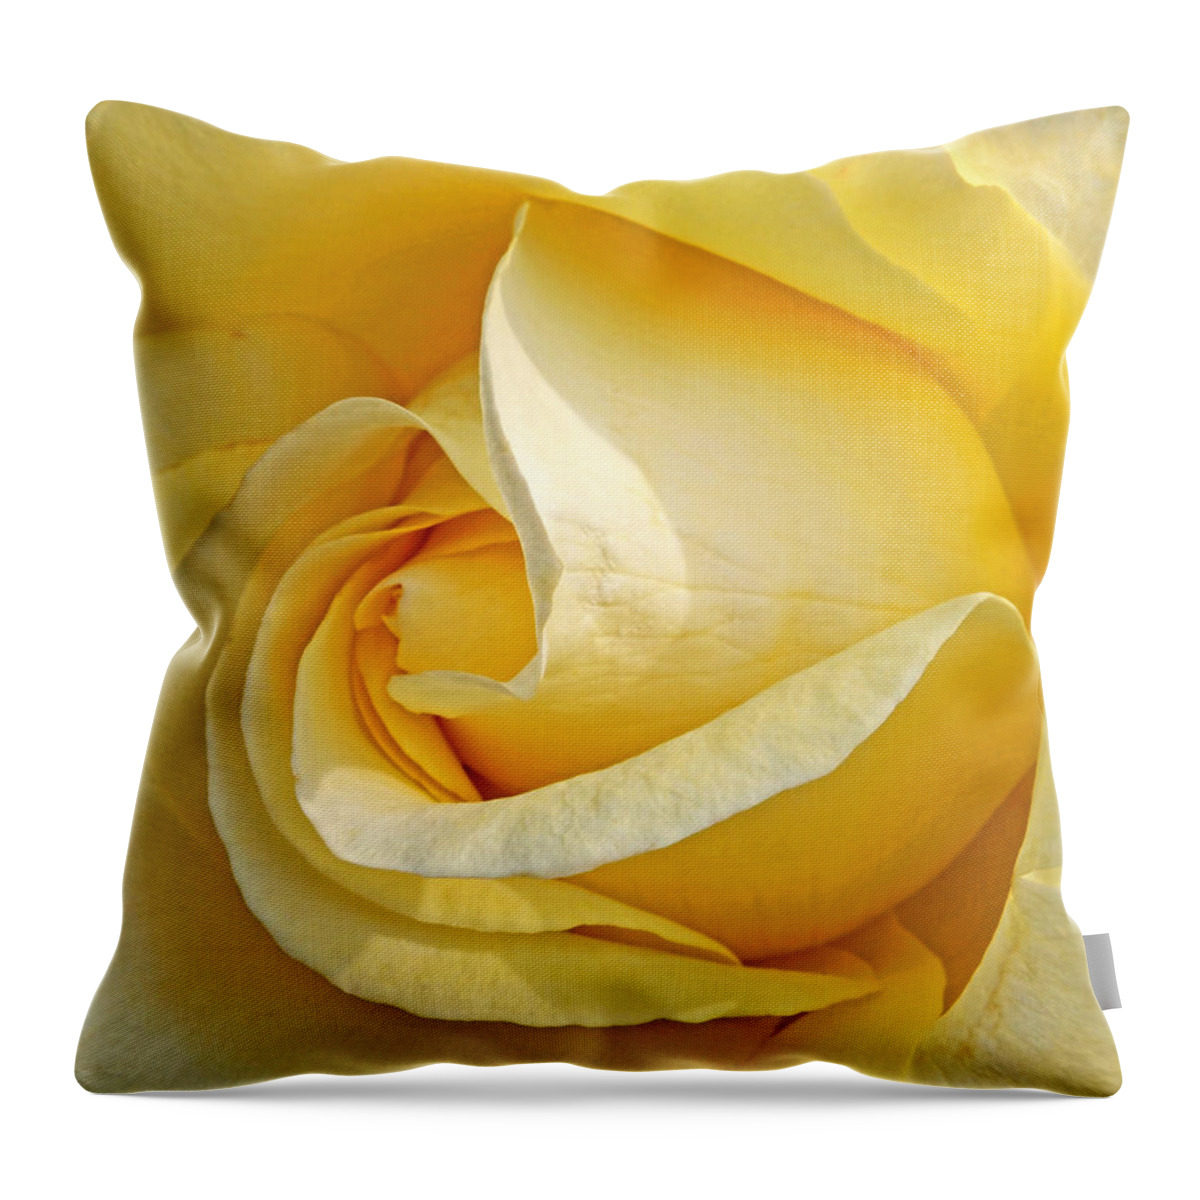 Rose Throw Pillow featuring the photograph Sunshine Rose by Gill Billington